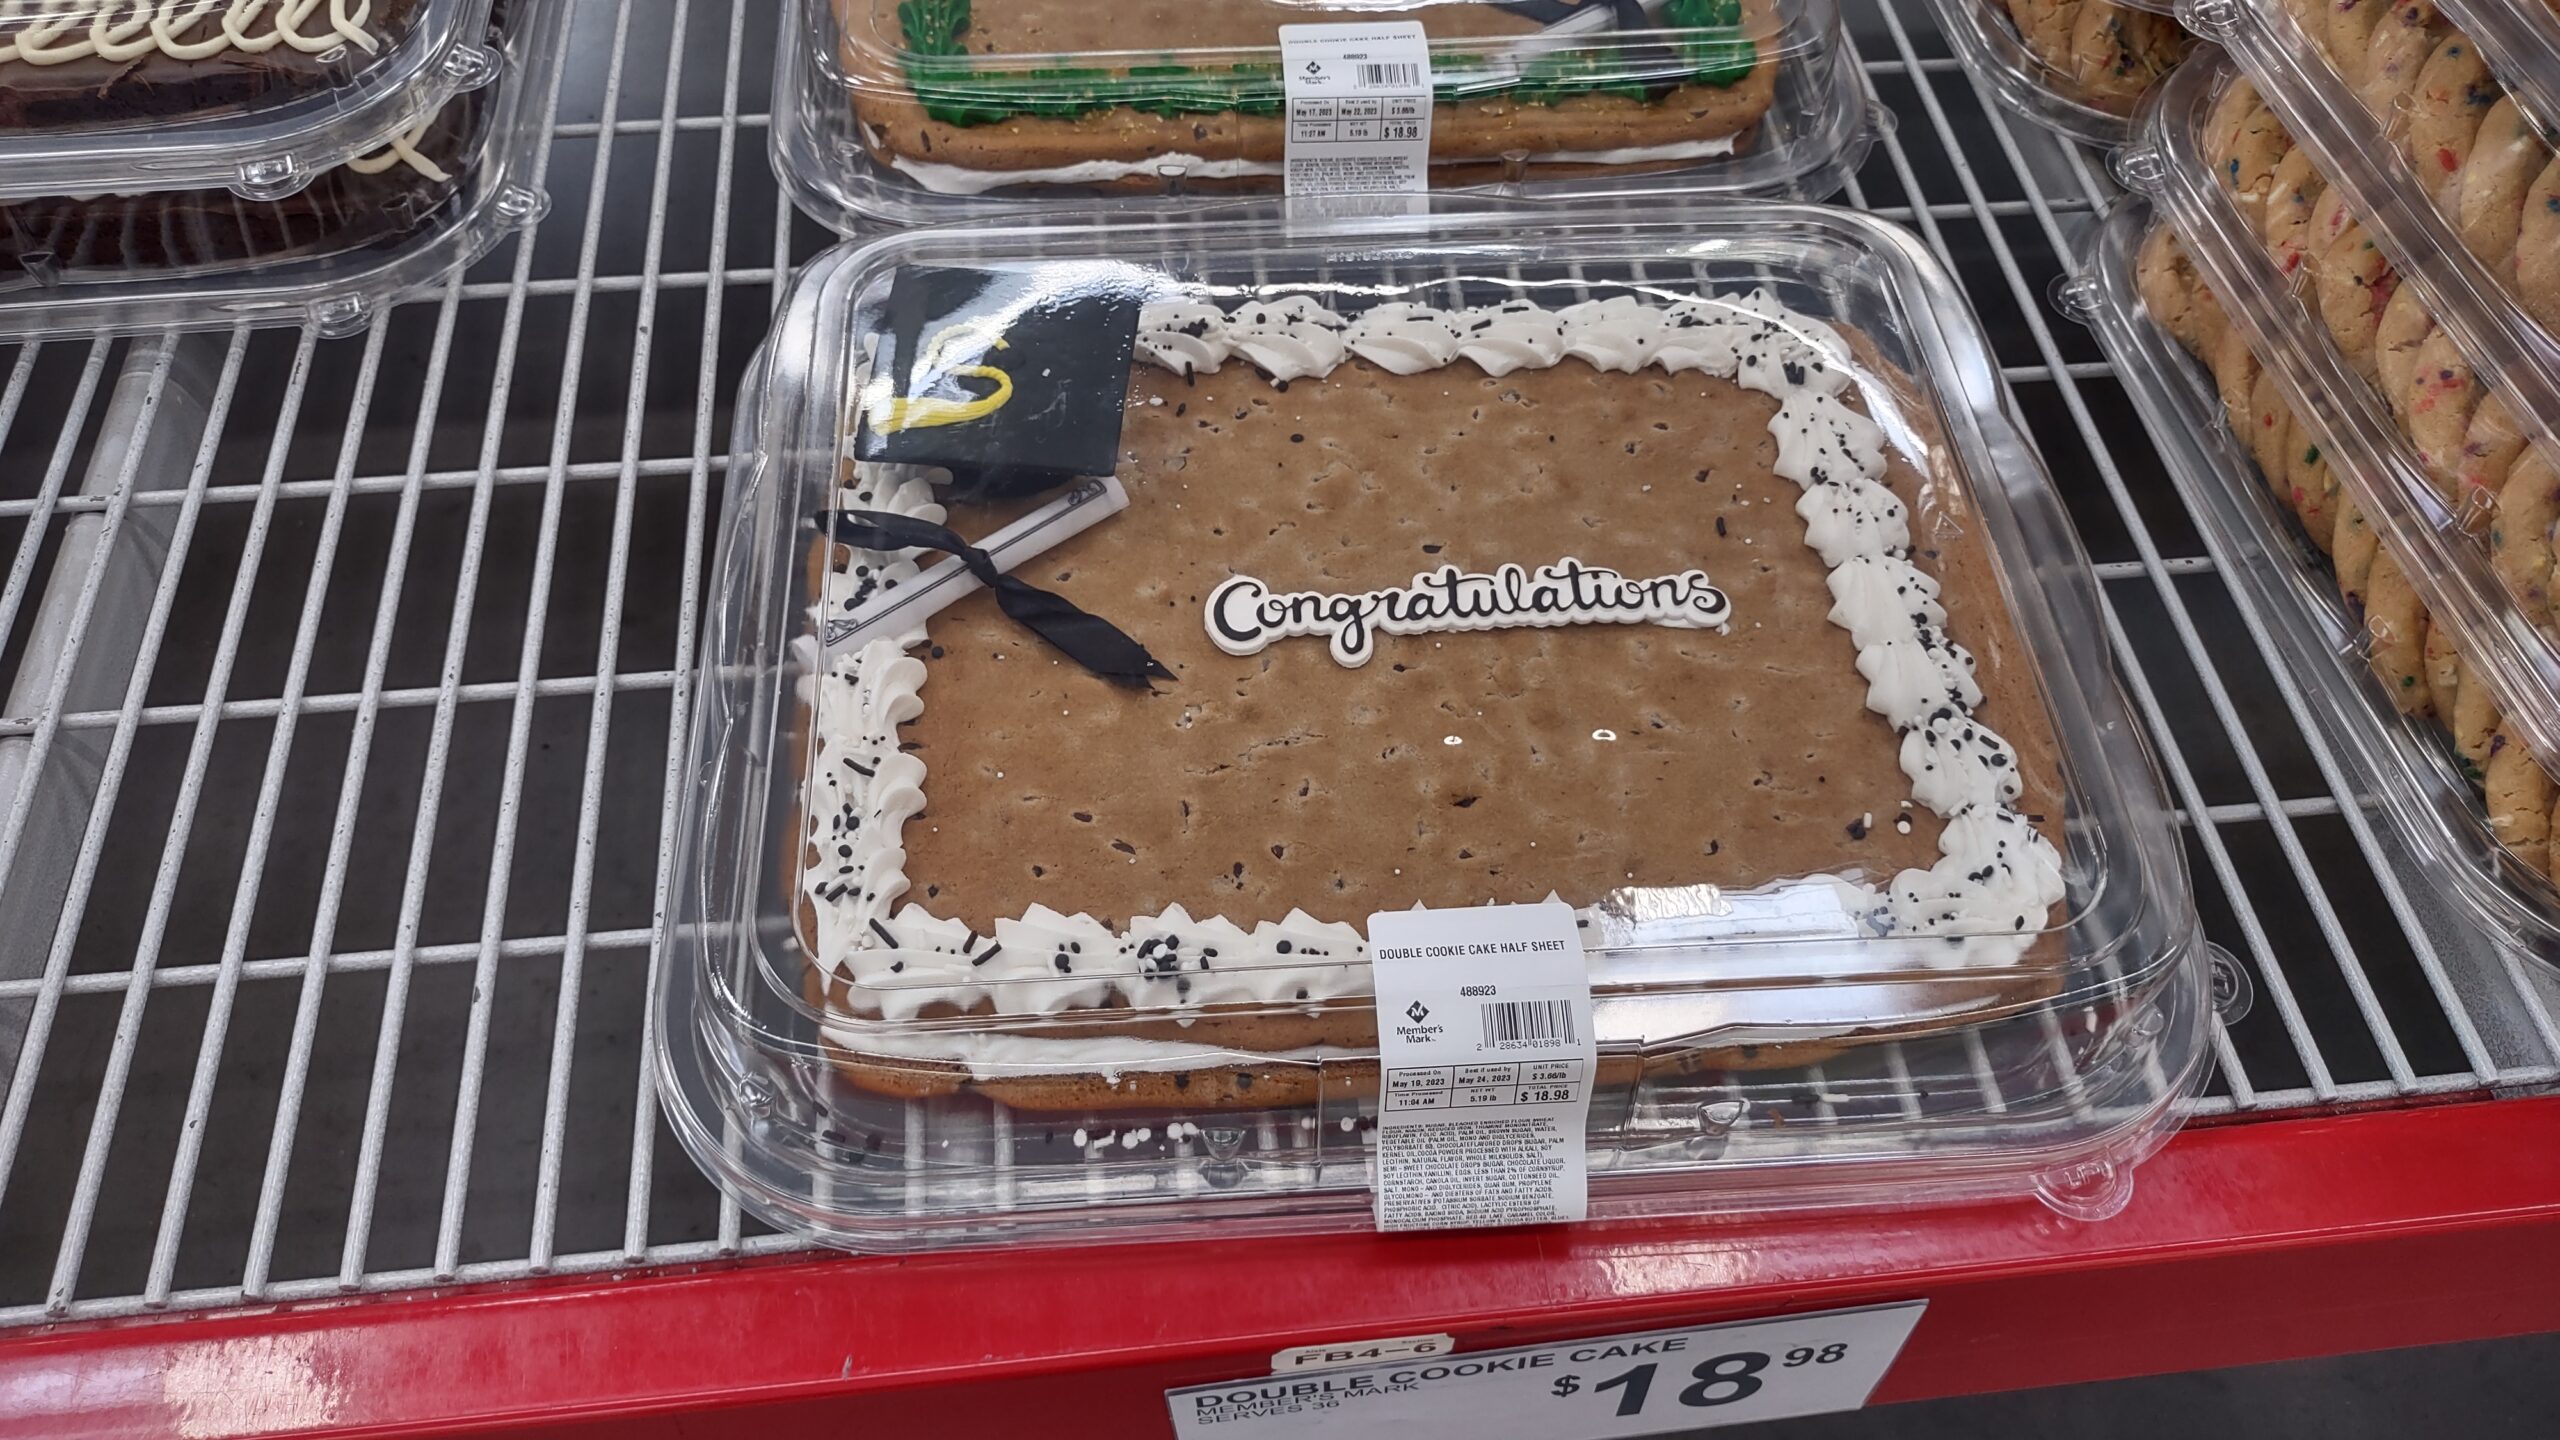 Double Cookie Graduation Cake $18.98 at Sam’s Club